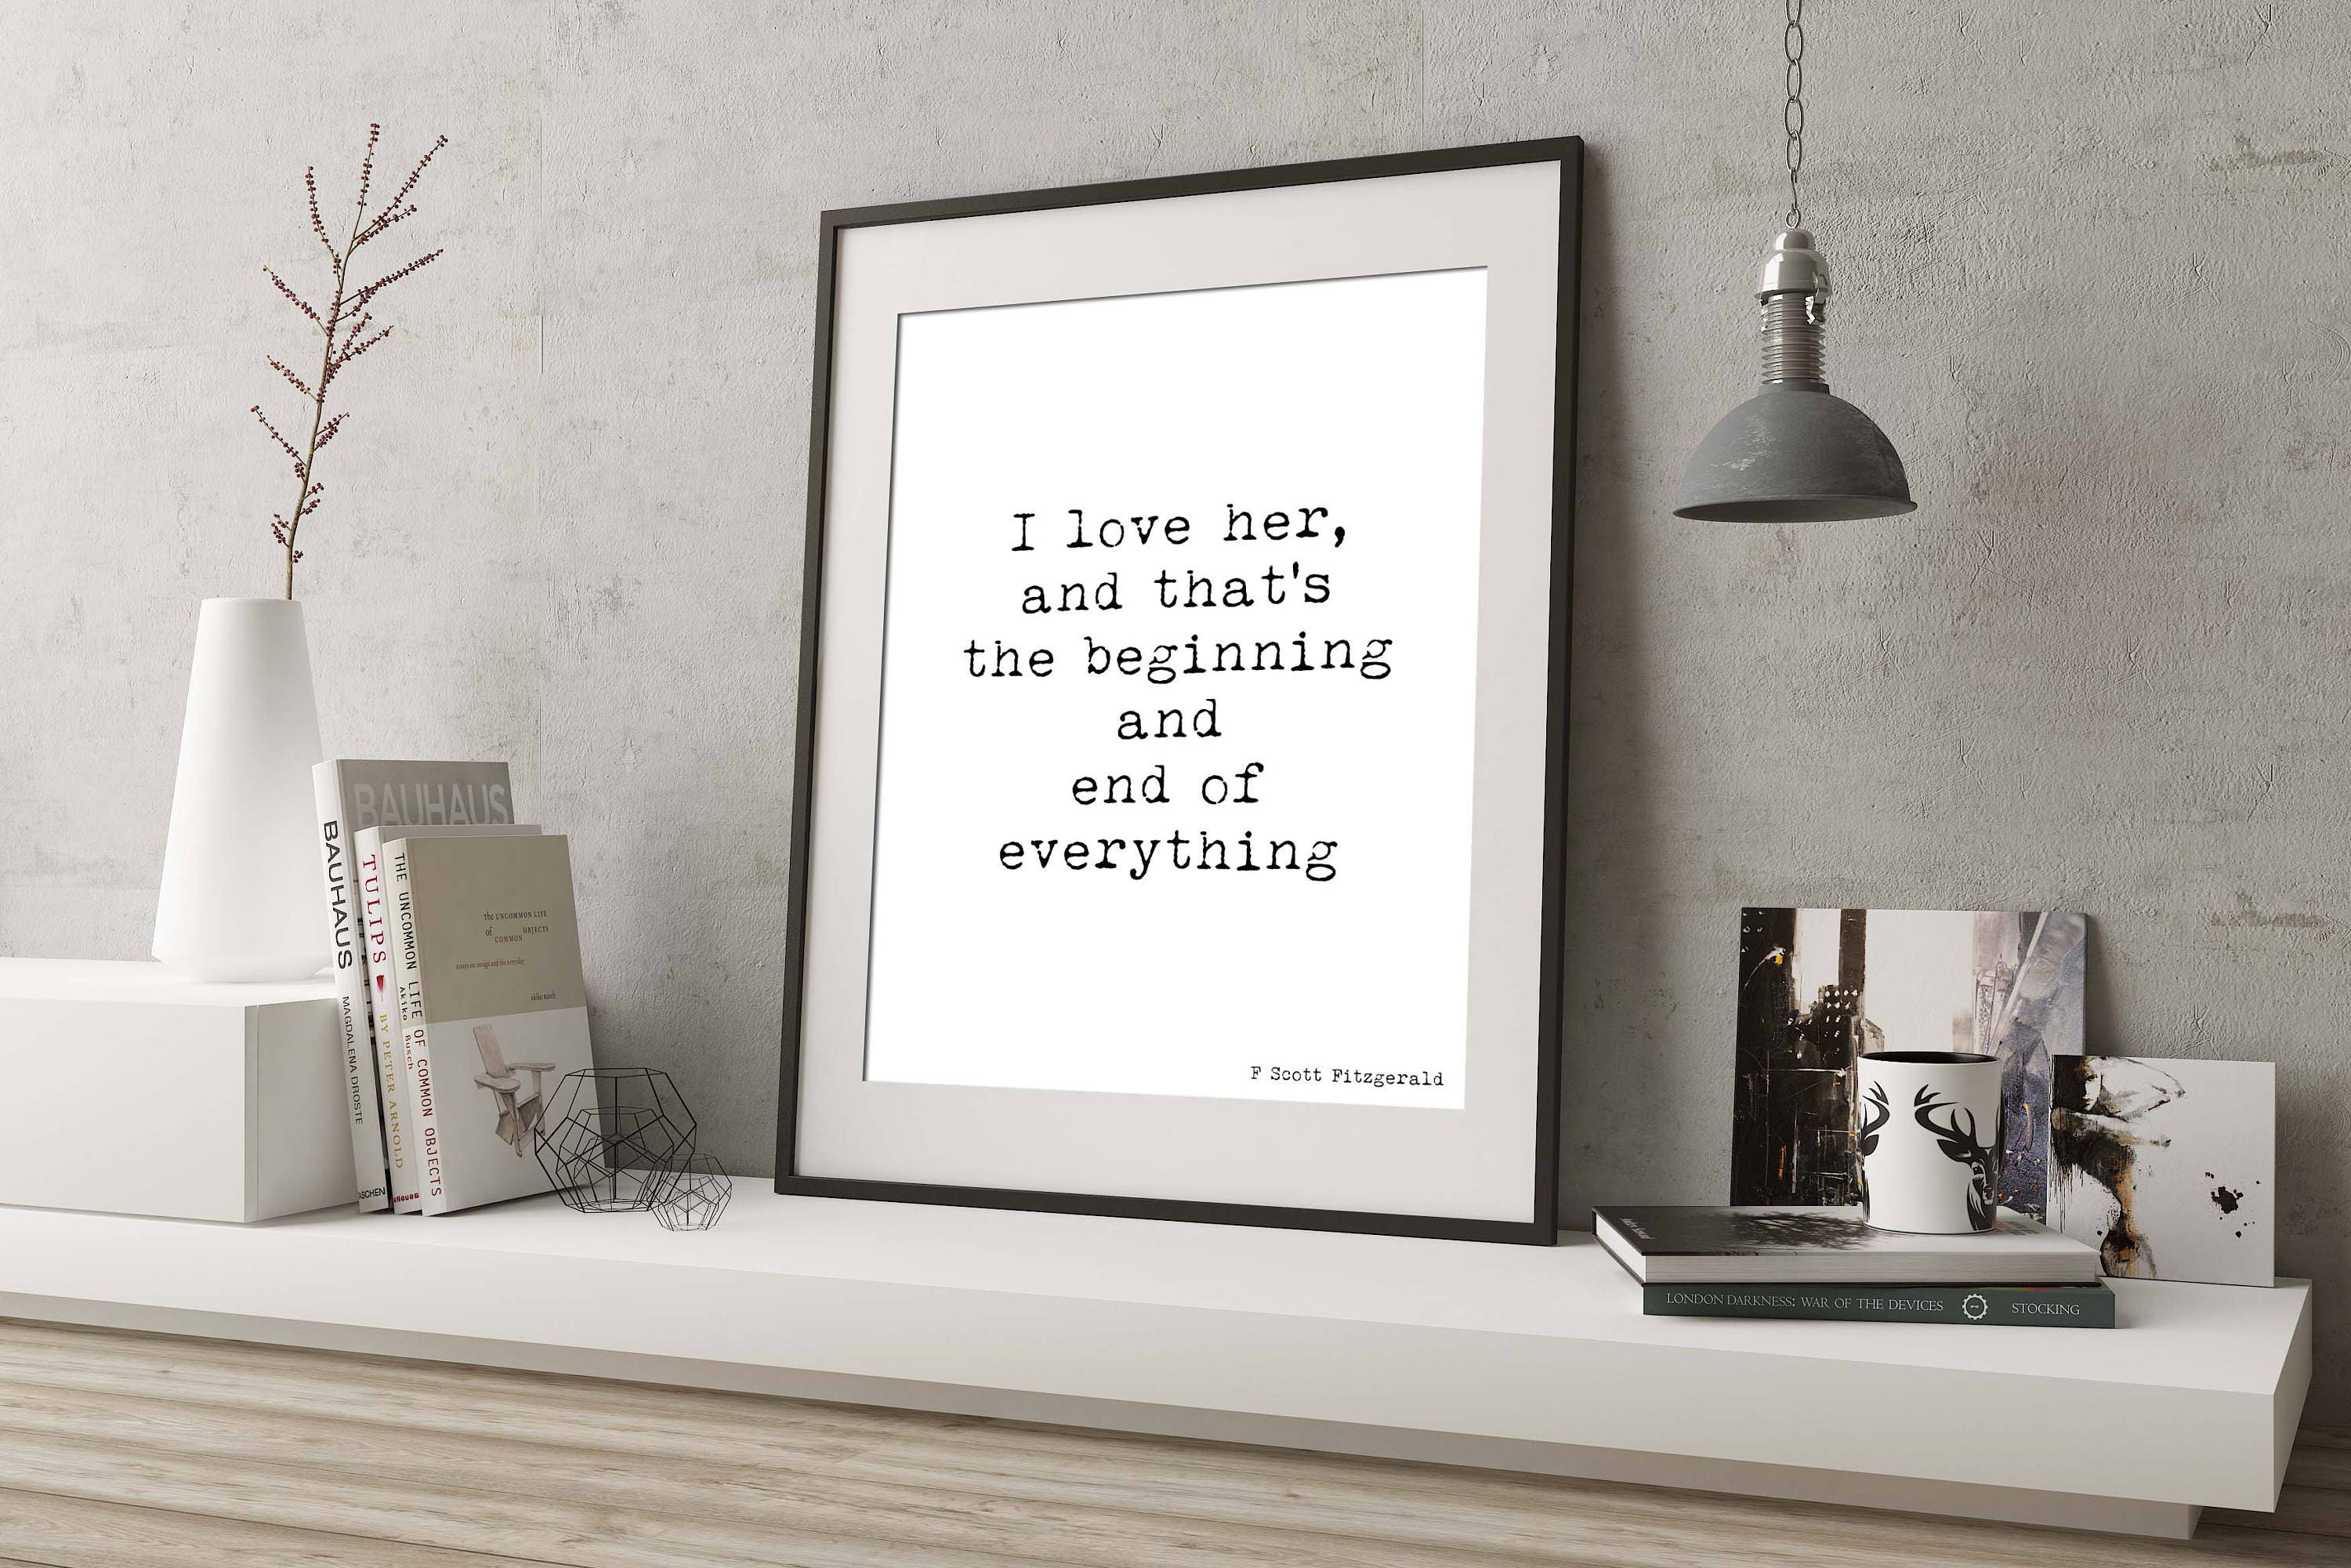 F Scott Fitzgerald Quote Print, I Love Her and That's The Beginning and End Of Everything